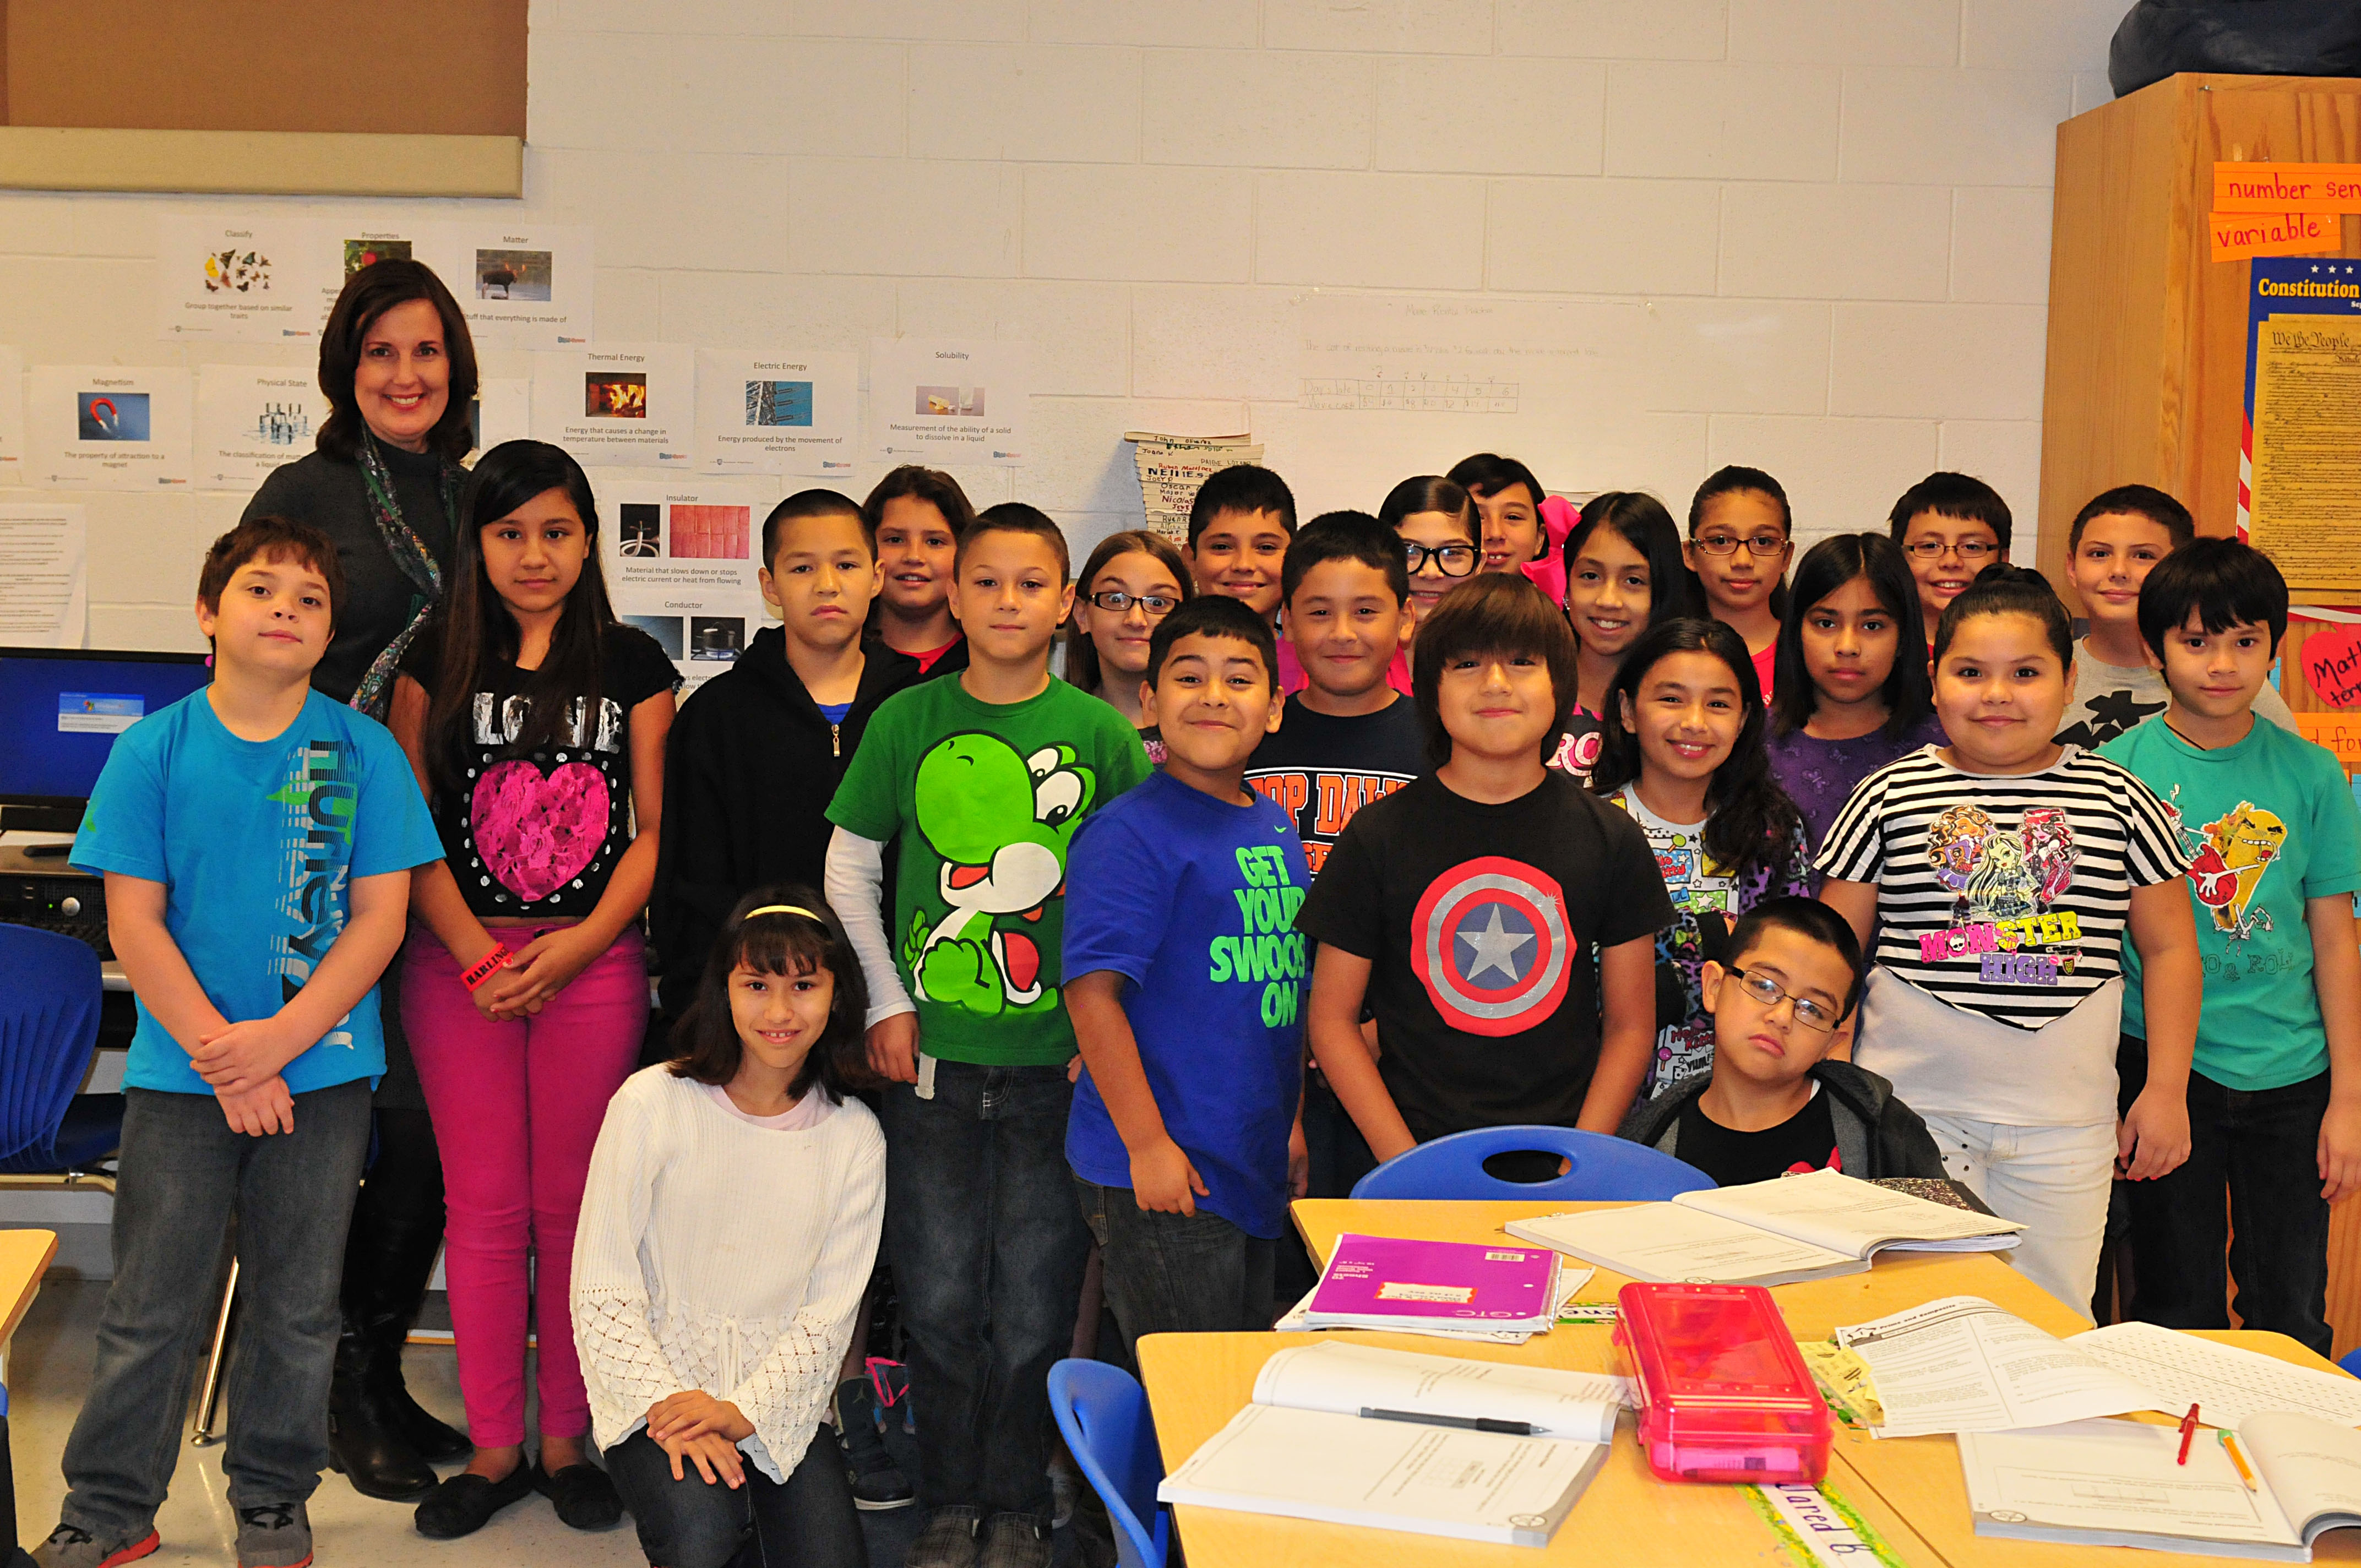 Teacher of the Week: Guevara sets high expectations, strives for engagement in classroom